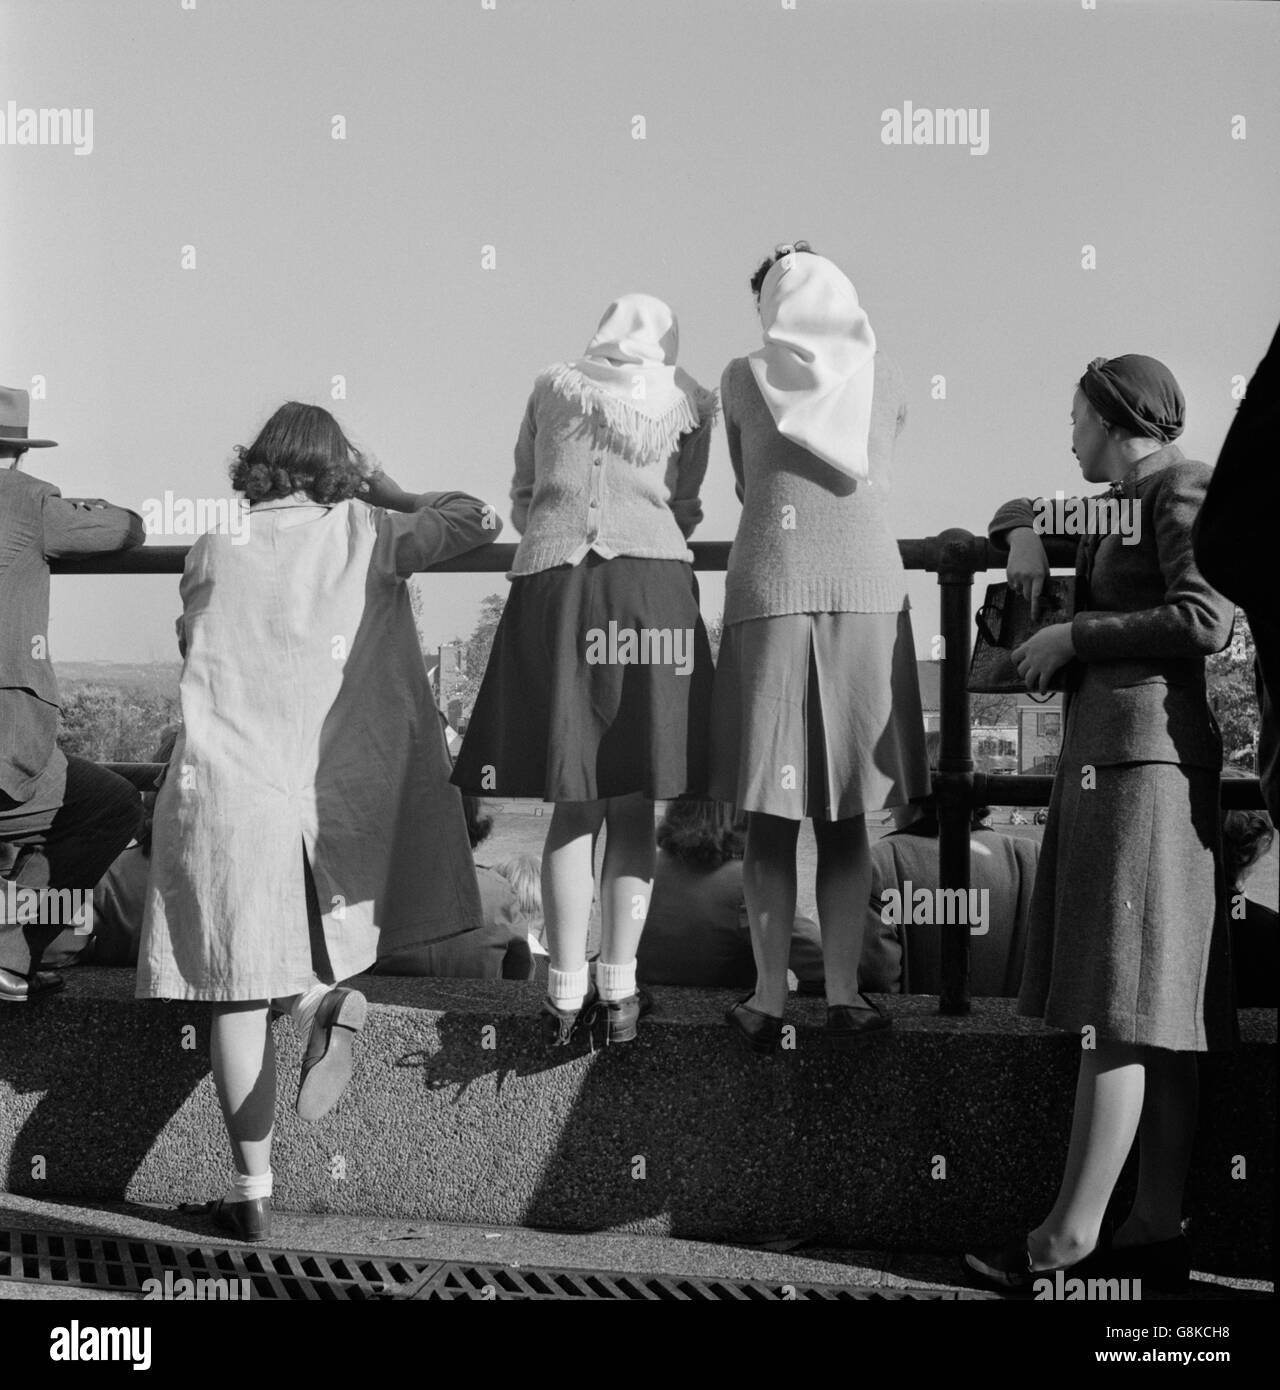 Student Fans Watching High School Football Game, Rear View, Washington DC, USA, Esther Bubley for Office of War Information, October 1943 Stock Photo